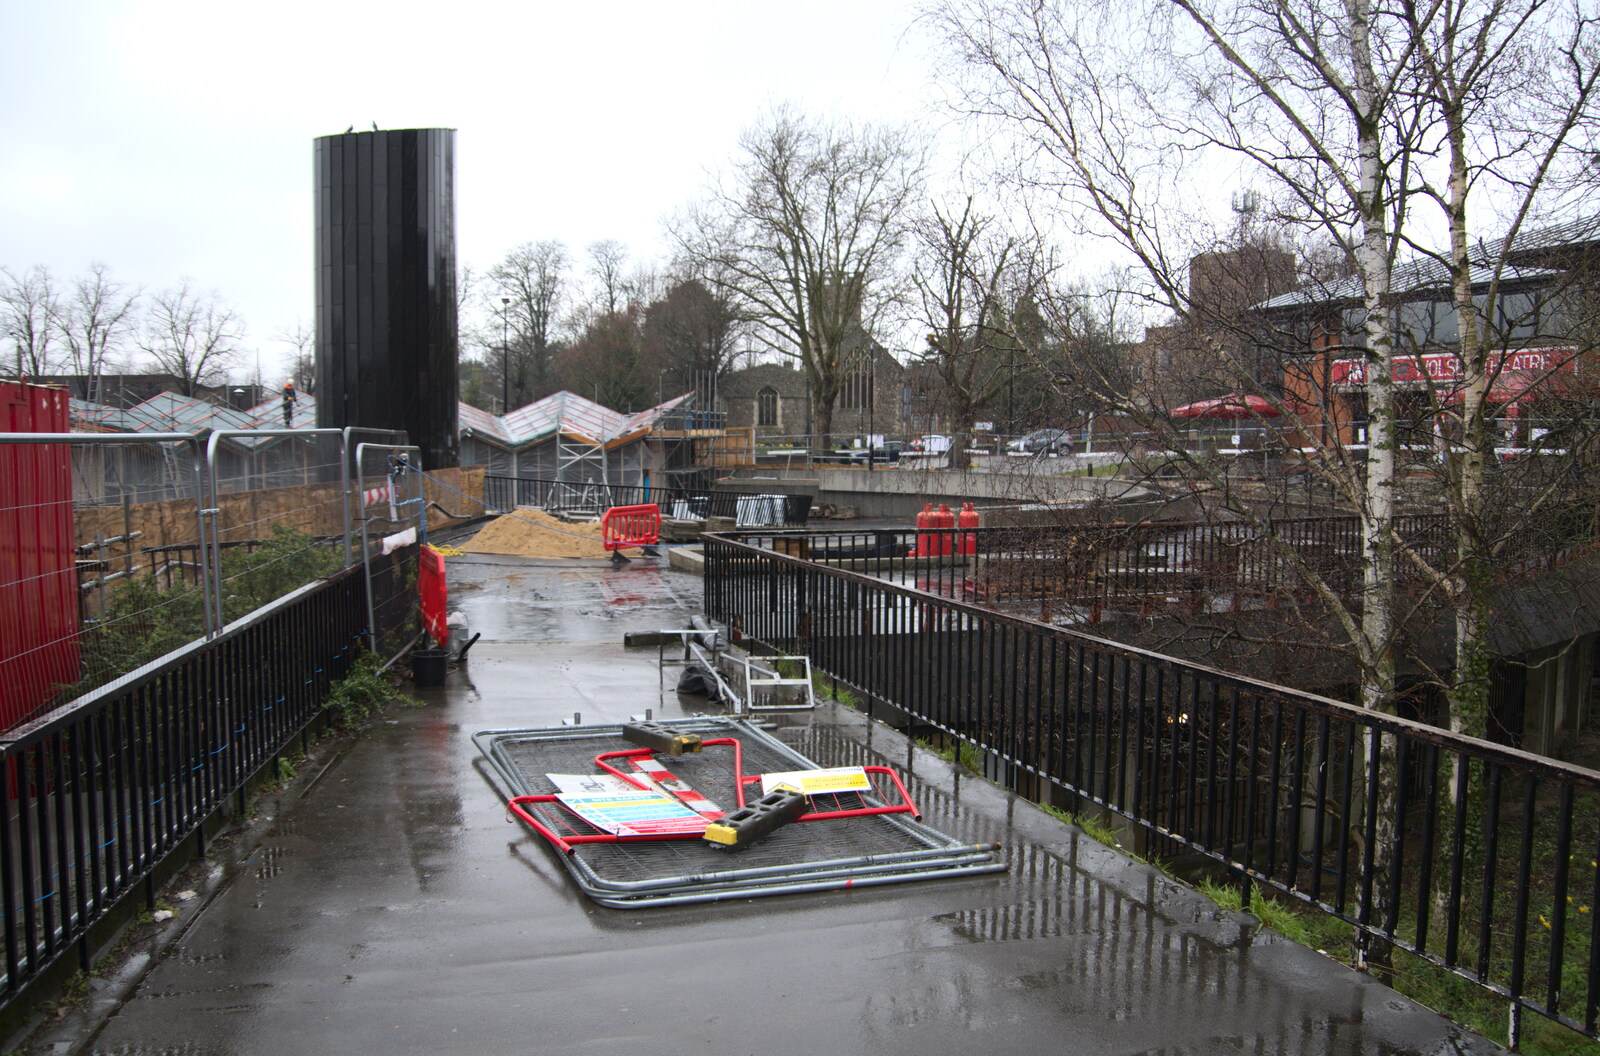 The old Snail car park has been demolished from Fred's Flute Exam, Ipswich, Suffolk - 5th March 2020